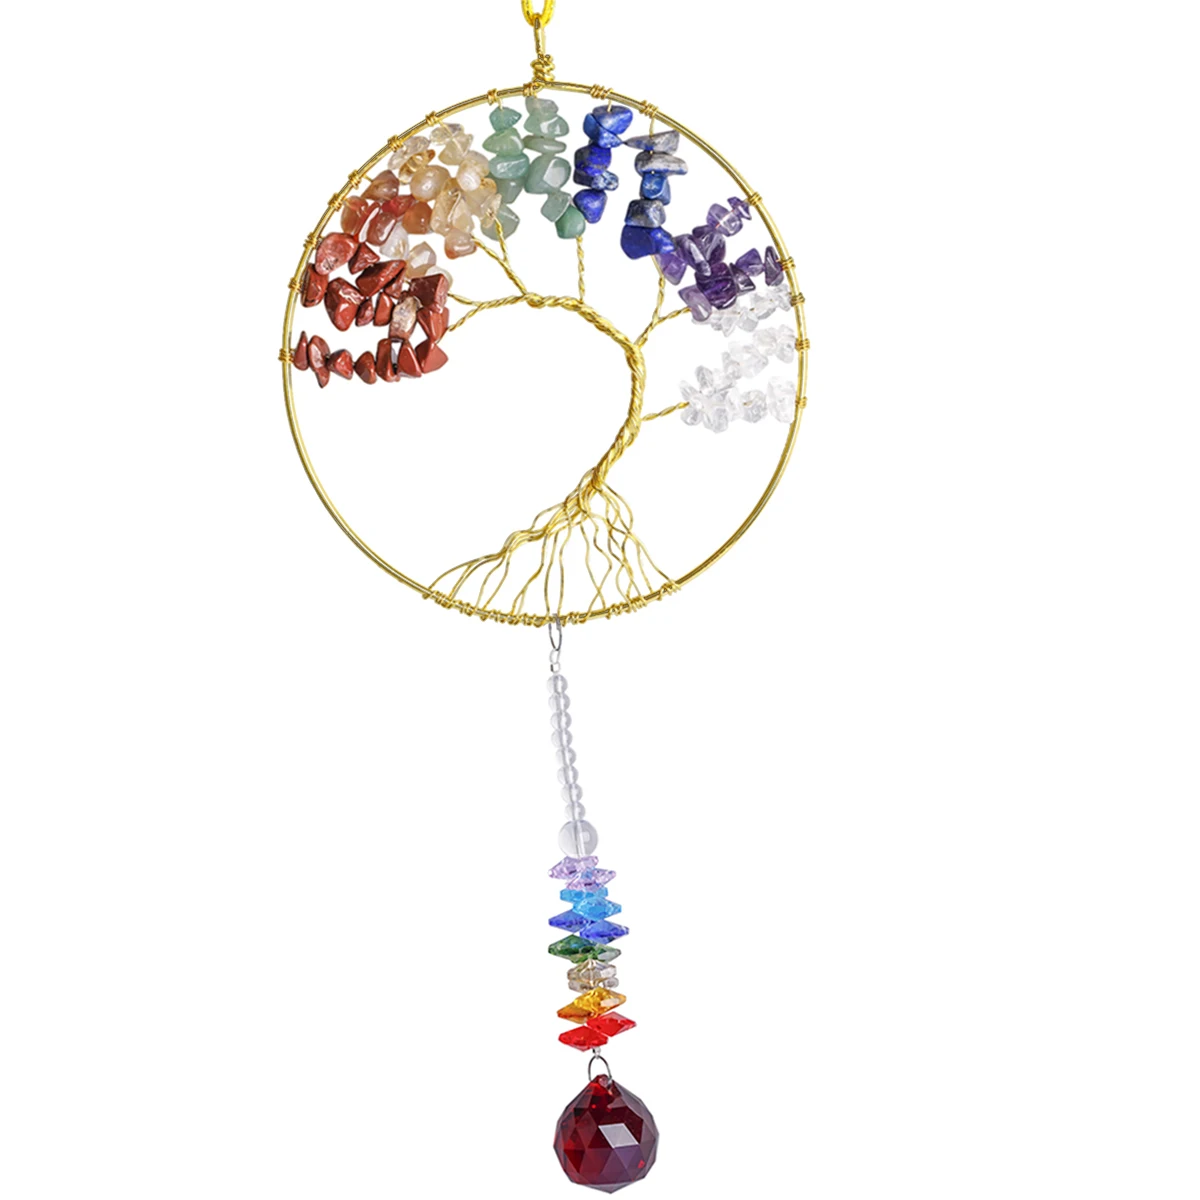 Tree Of Life Crystal Point Prism Glass Pendant Wind Chimes Natural 7 Chakra Stone Hanging Ornaments For Wall Window Home Decor velvet necklace jewelry display tray easel showcase bracelet storage holder organizer for counter window shop stand home rack